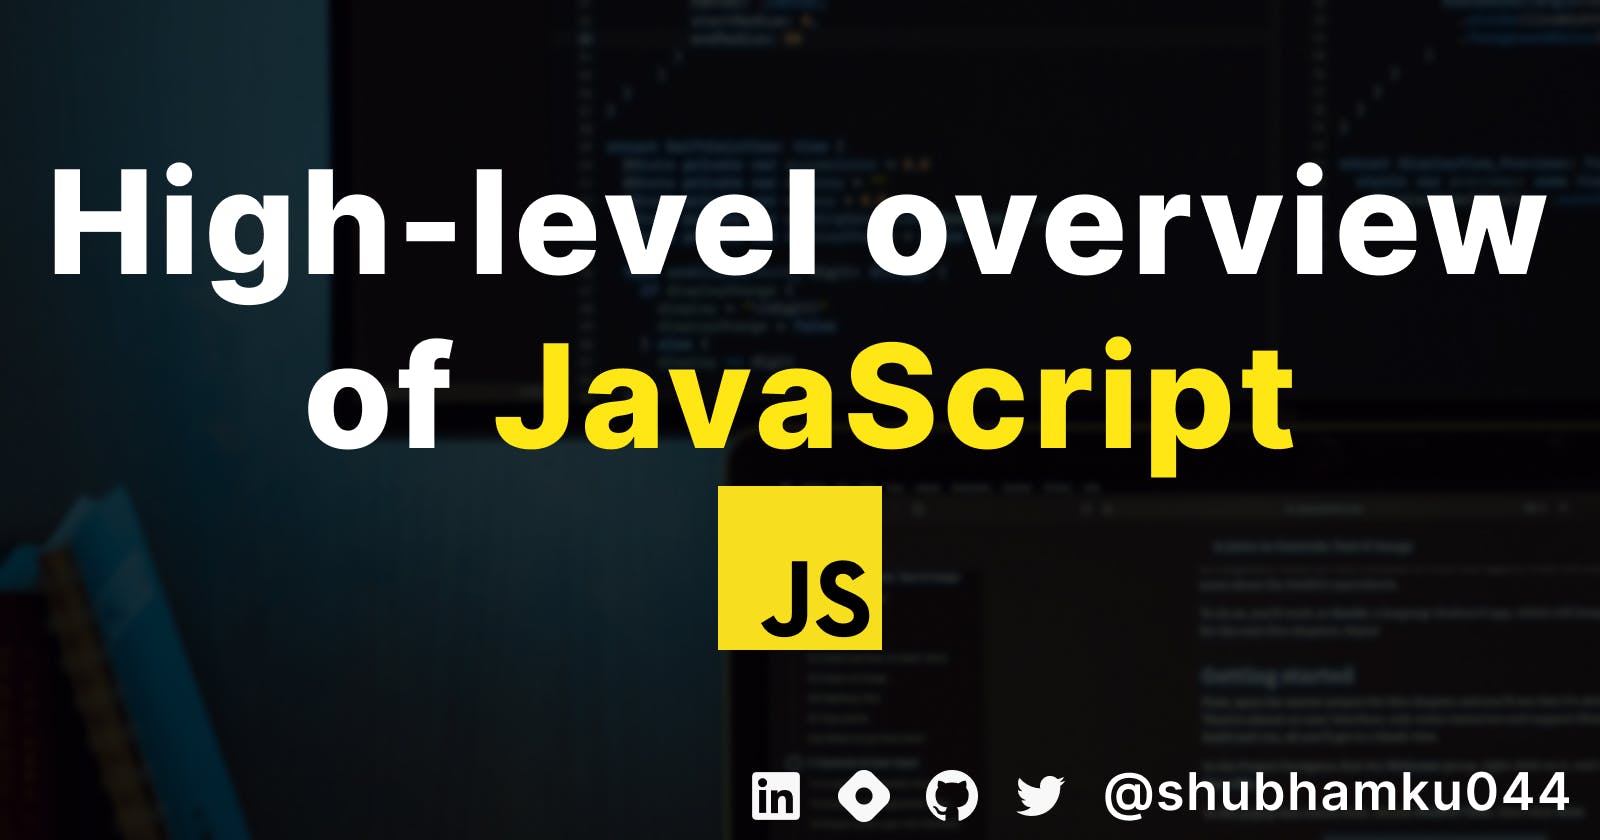 High-level overview of JavaScript